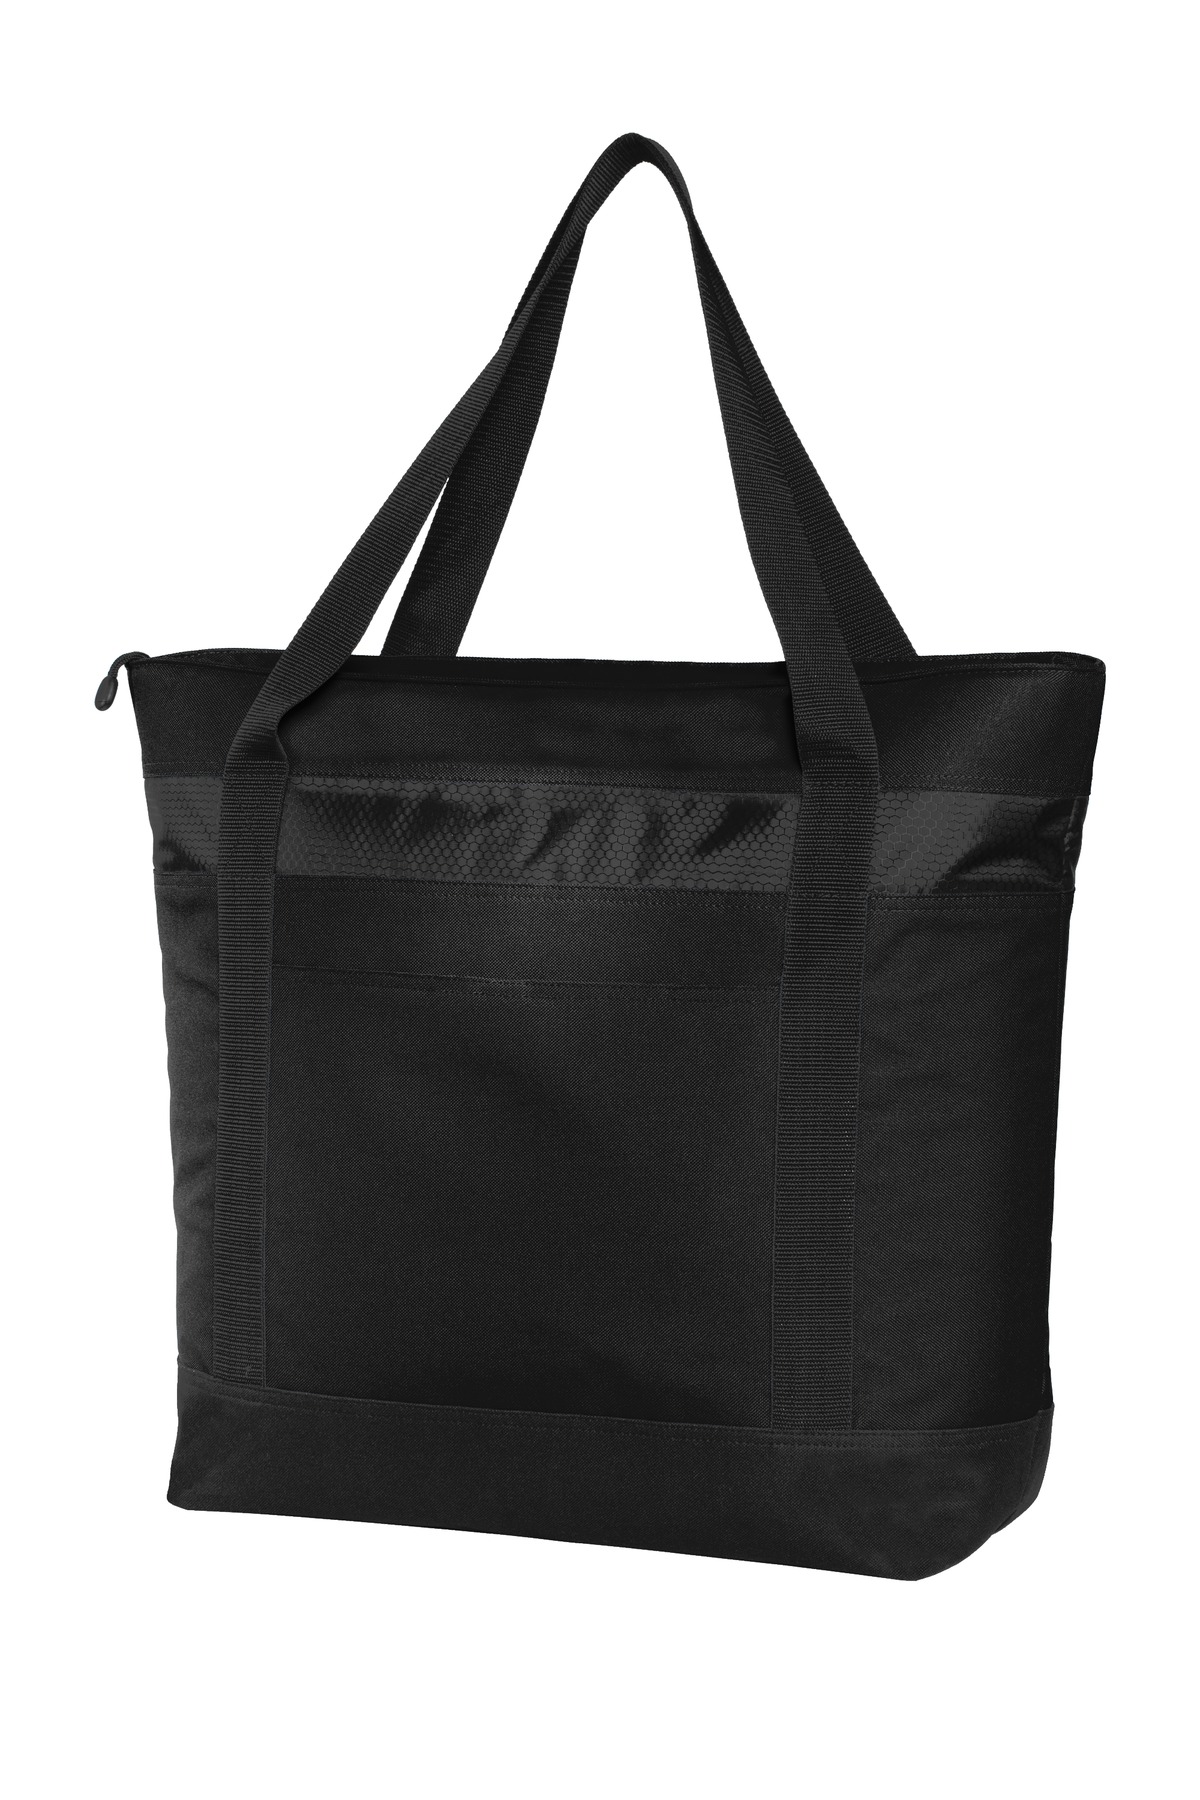 Port Authority Hospitality Bags ® Large Tote Cooler.-Port Authority